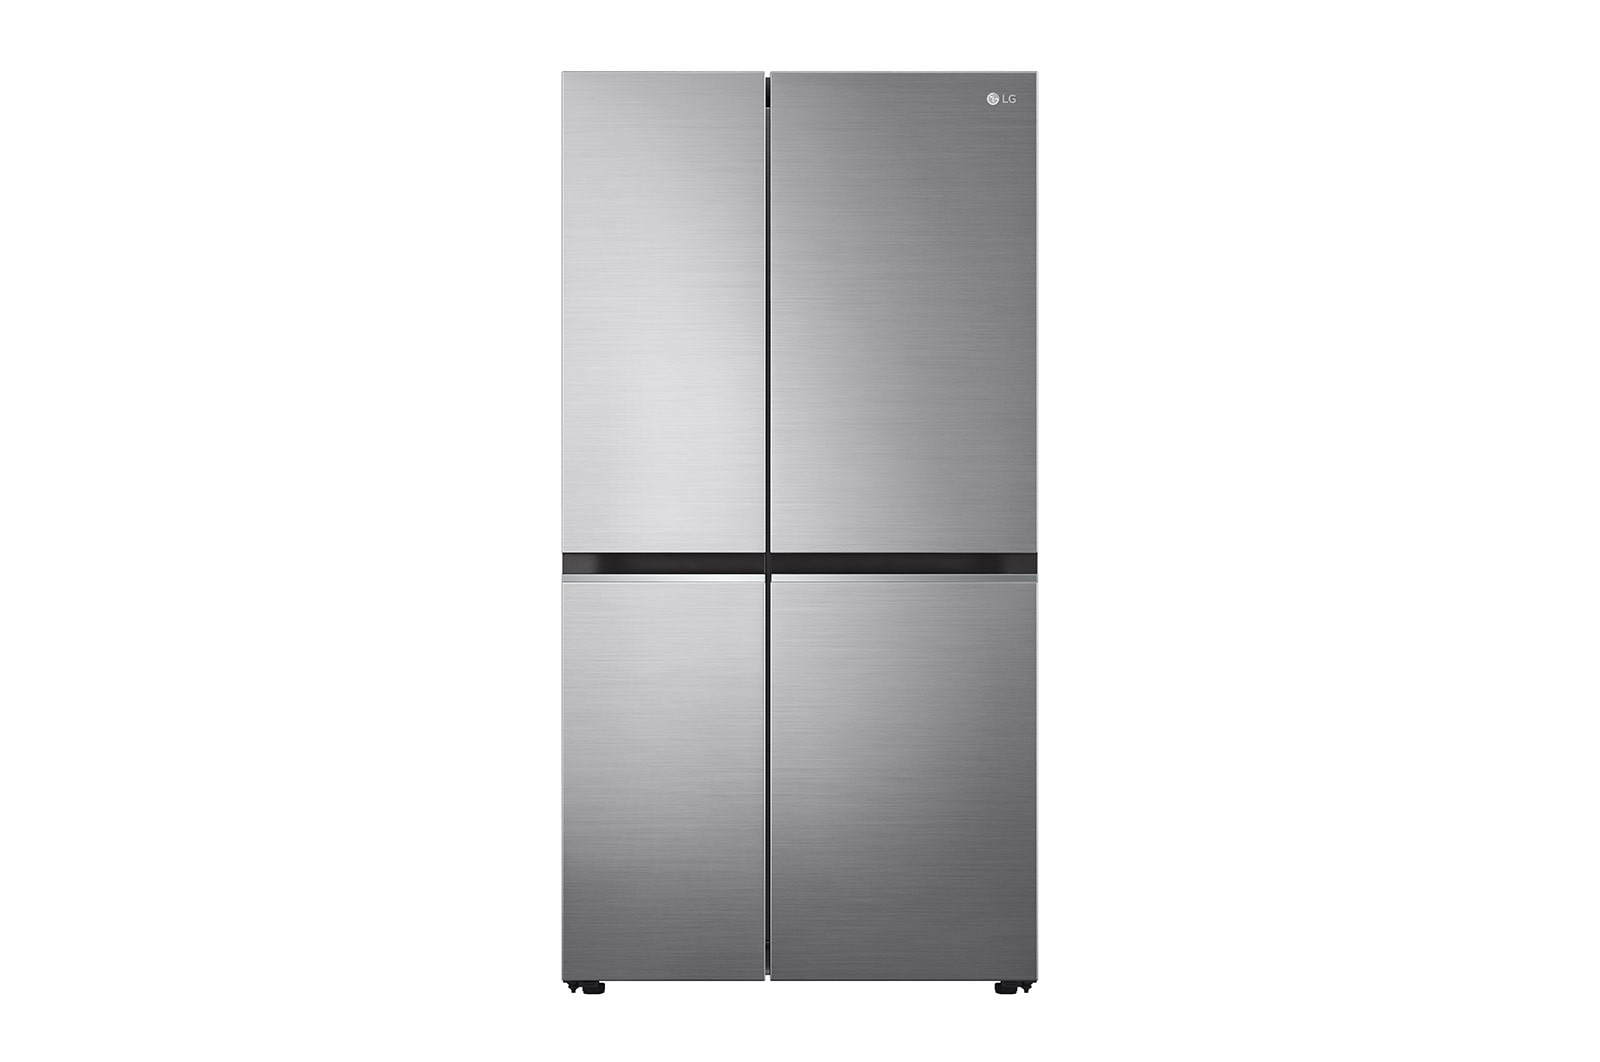 LG GL-B257EPZX side by side refrigerator front view